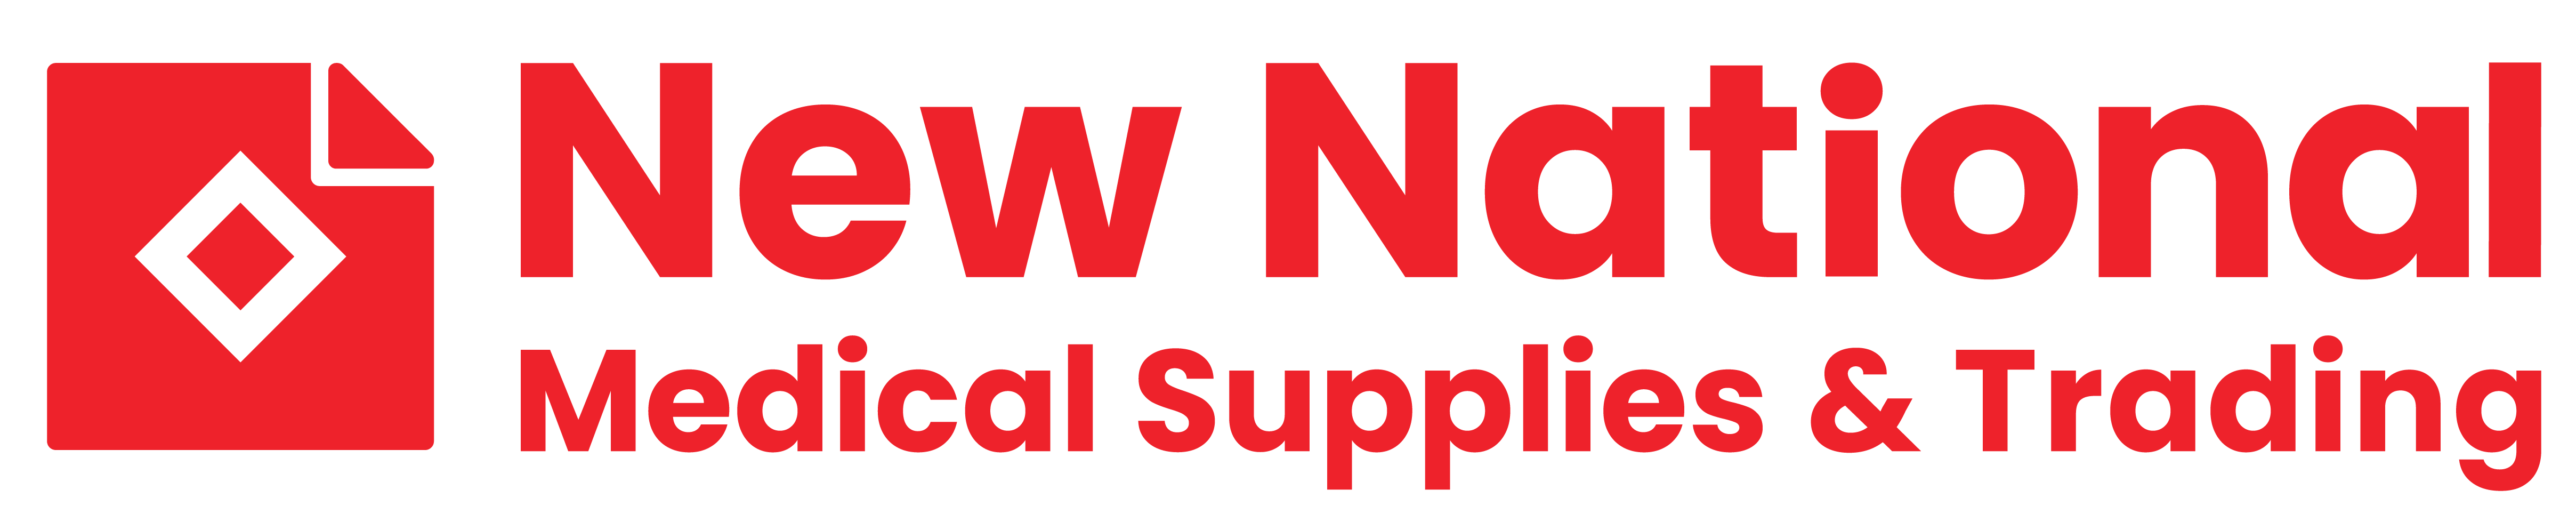 New National Medical Supplies and Trading